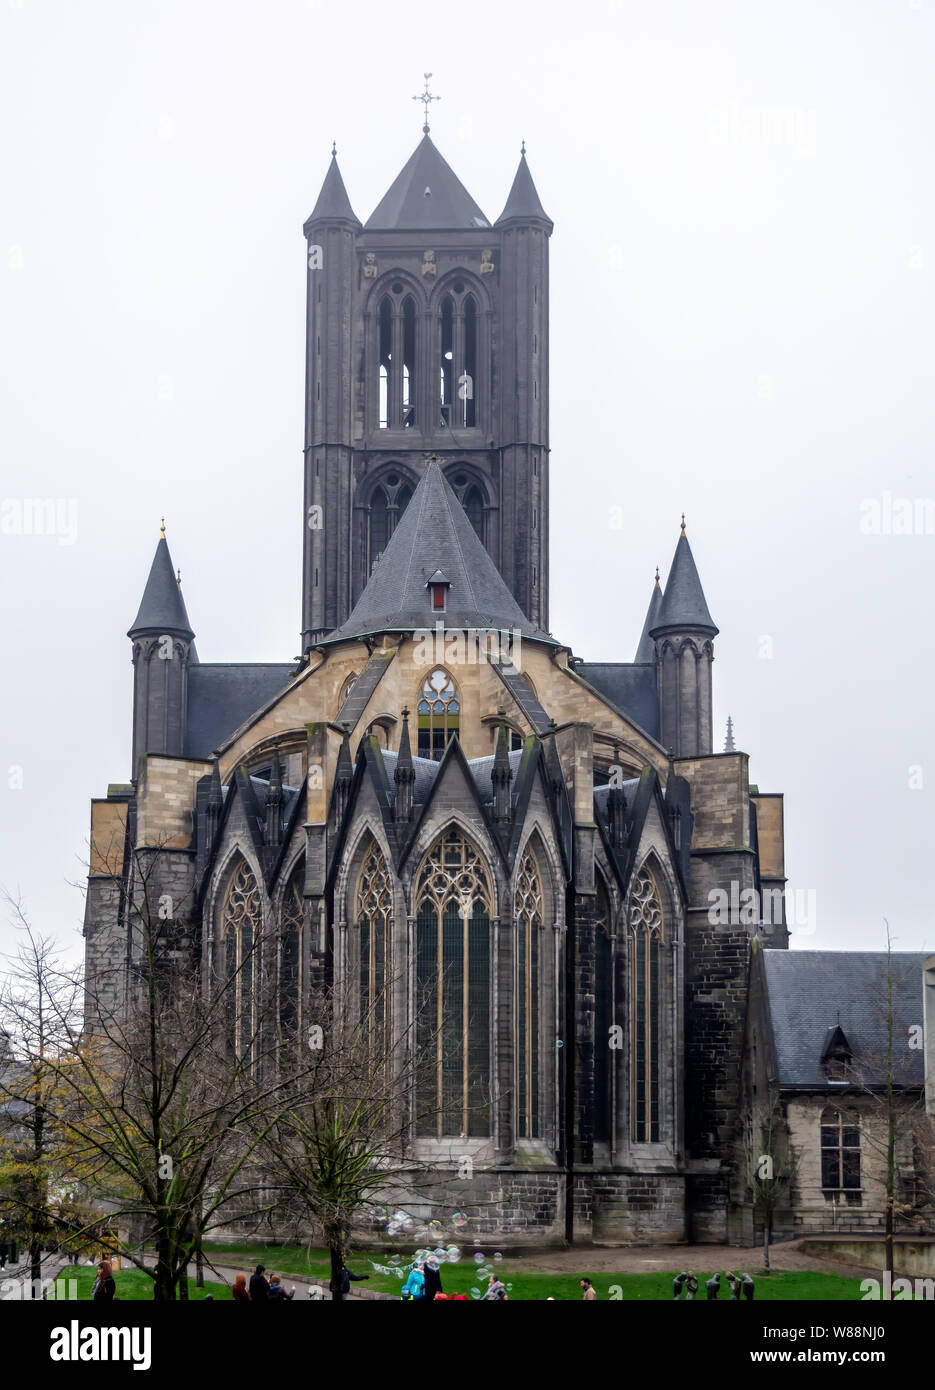 St Nicholas’ Church is one of famous Three Towers of Ghent - spires of city skyline. Stock Photo